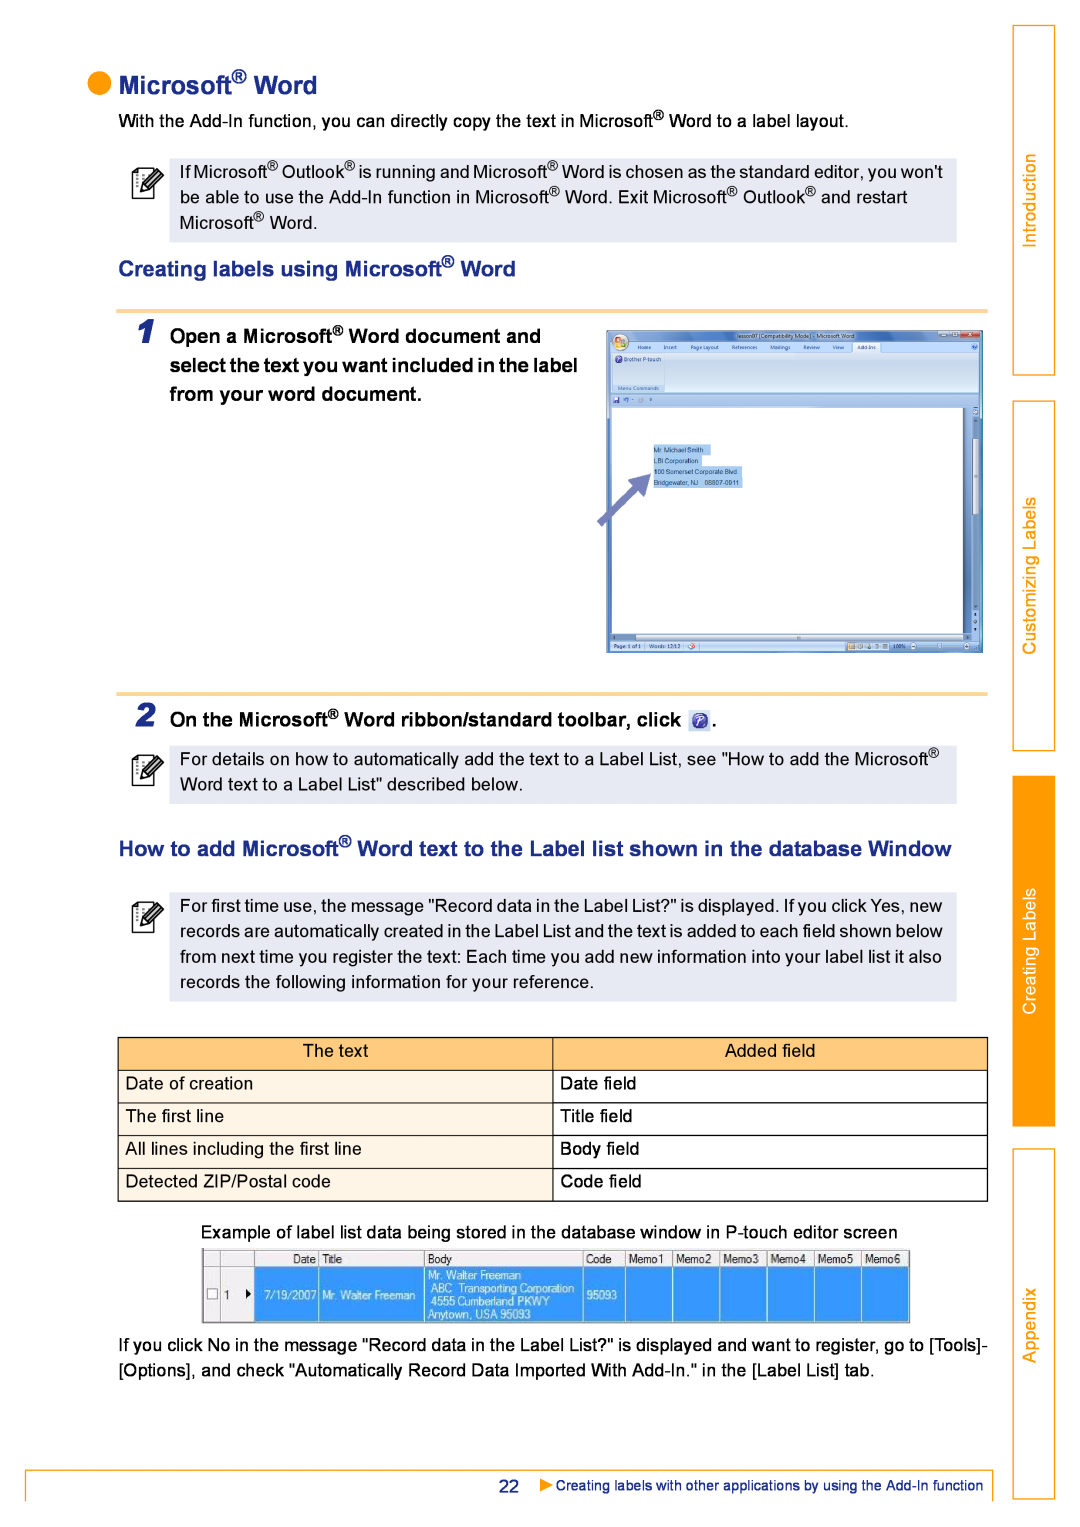 Brother TD-4000 Creating labels using Microsoft Word, On the Microsoft Word ribbon/standard toolbar, click, Appendix 